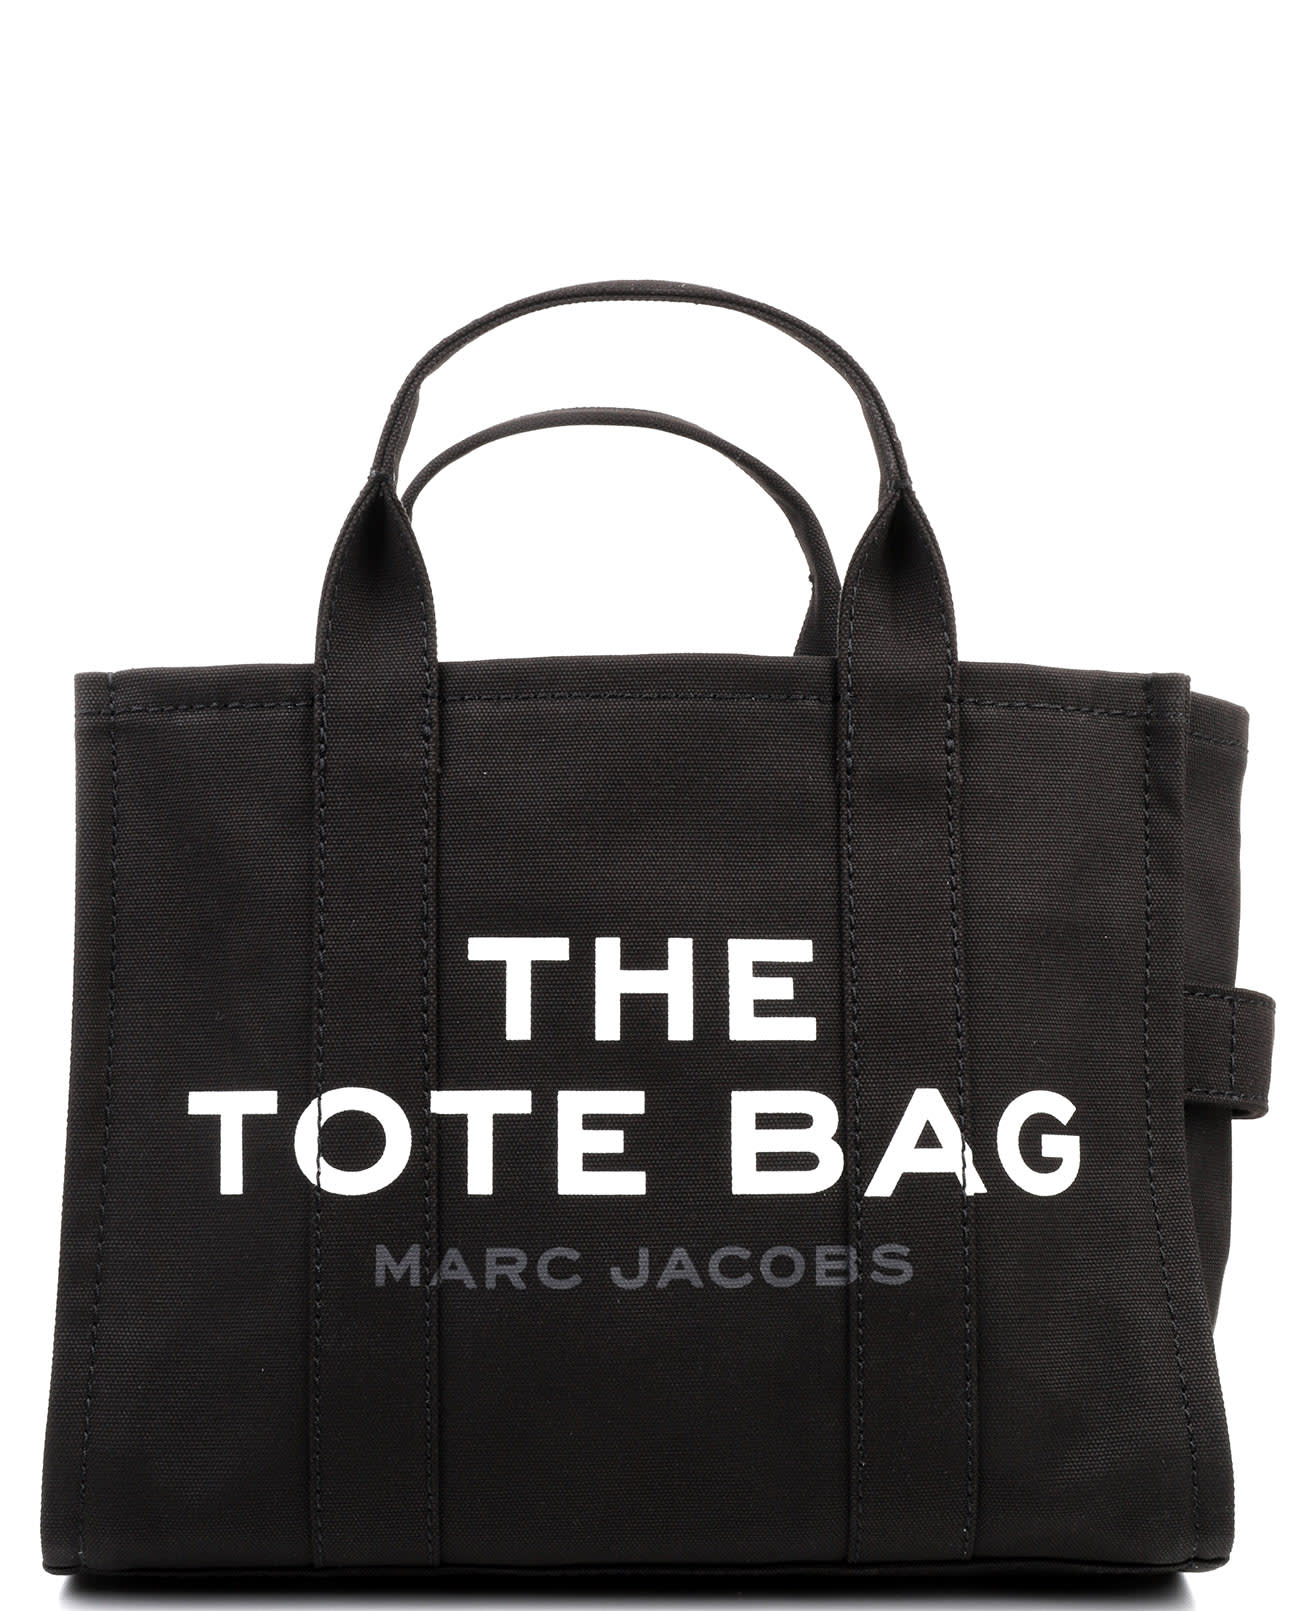 MARC JACOBS BLACK SMALL TRAVELER TOTE,11865207